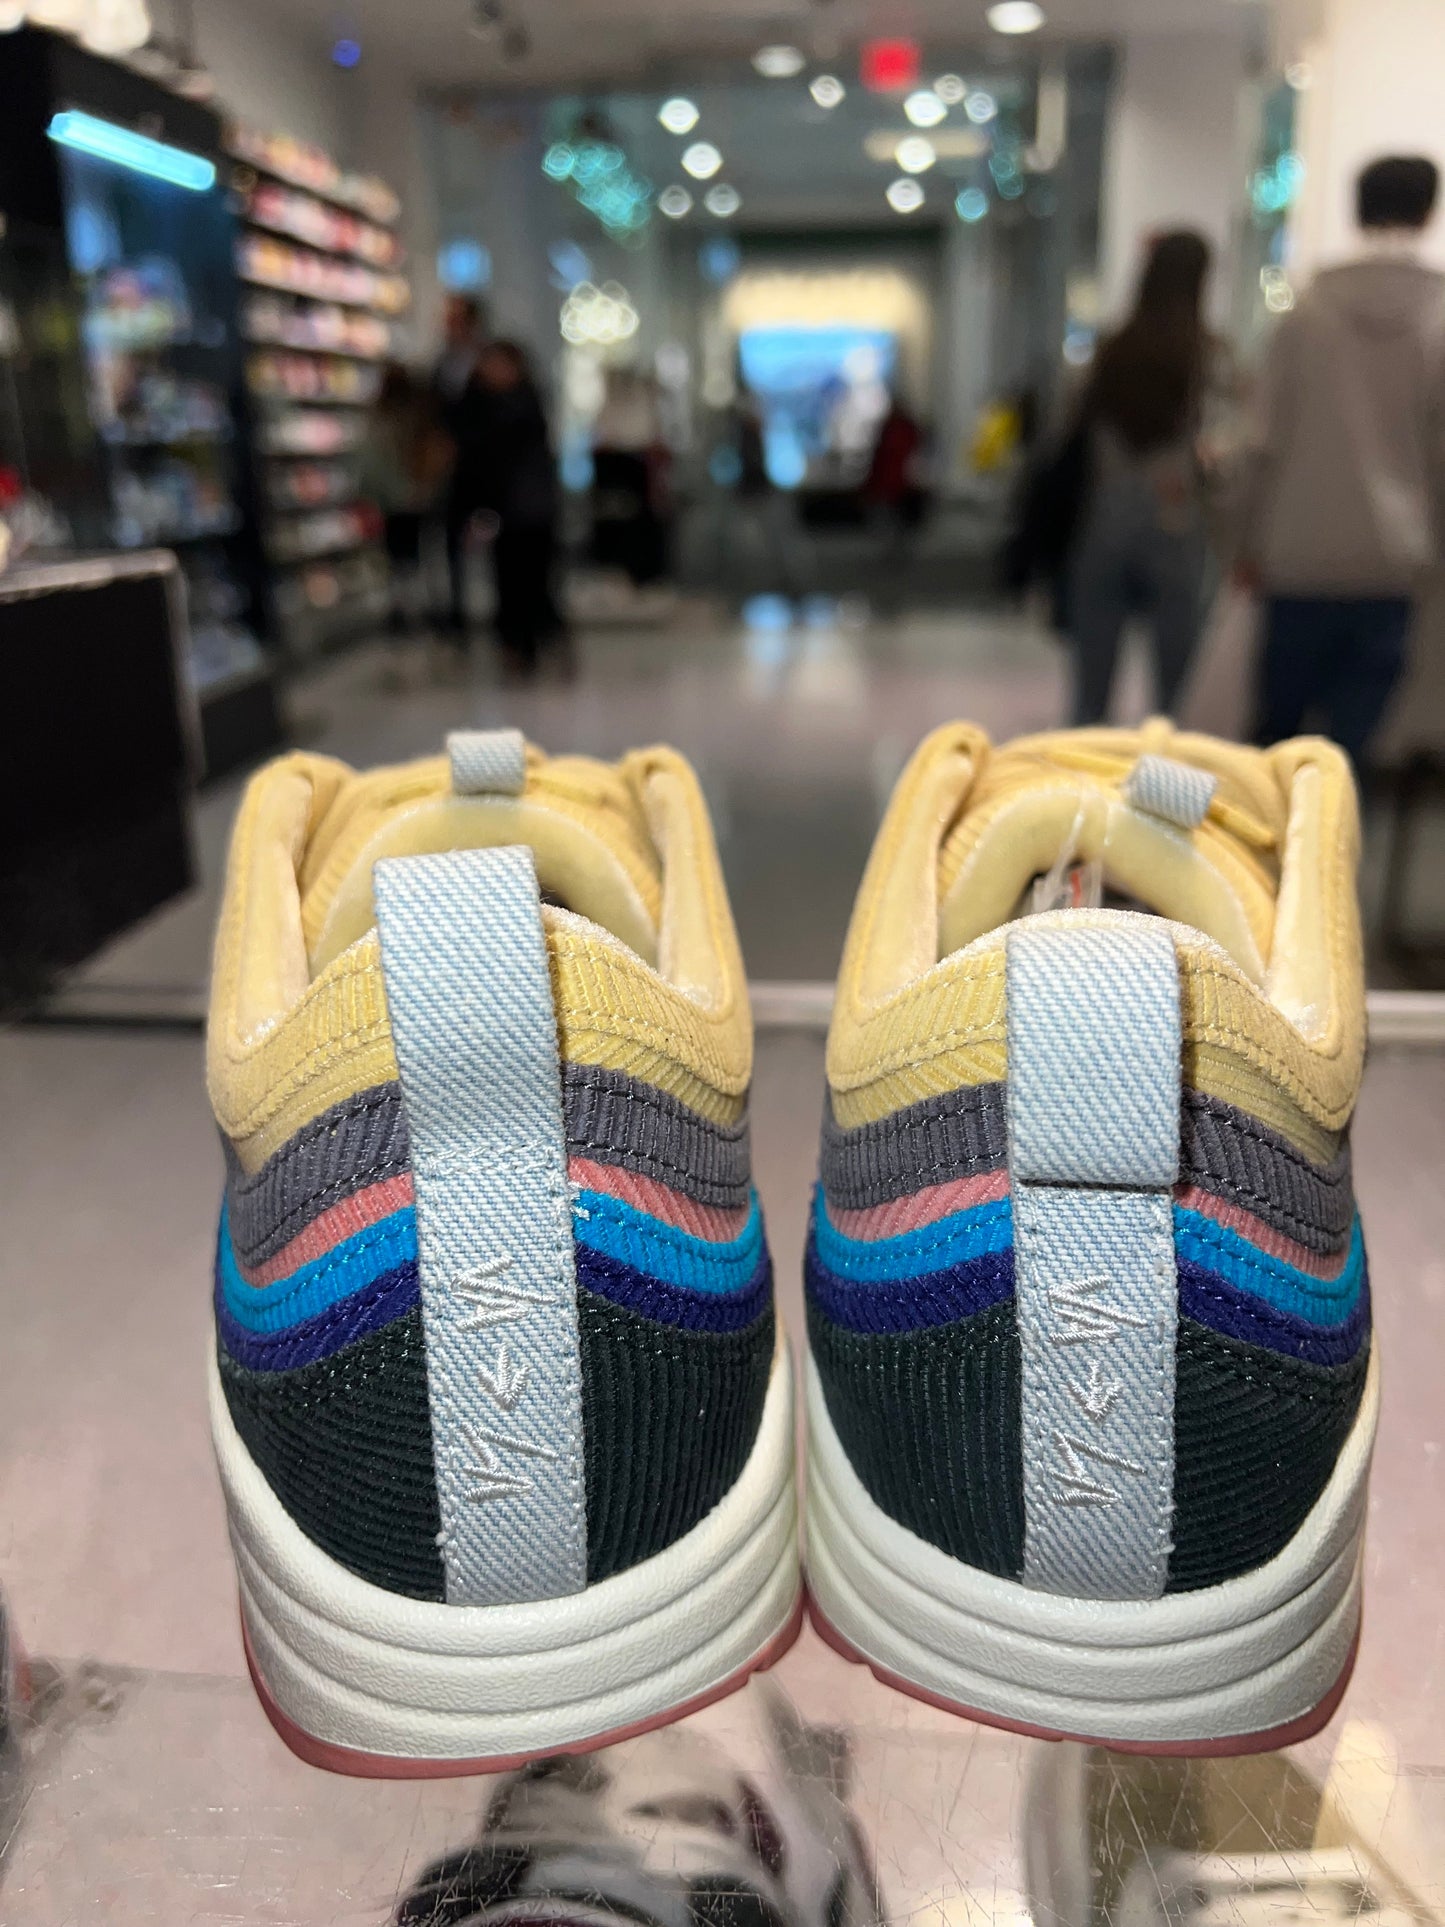 Size 13 Air Max 1/97 “Sean Wotherspoon” Brand New (Mall)